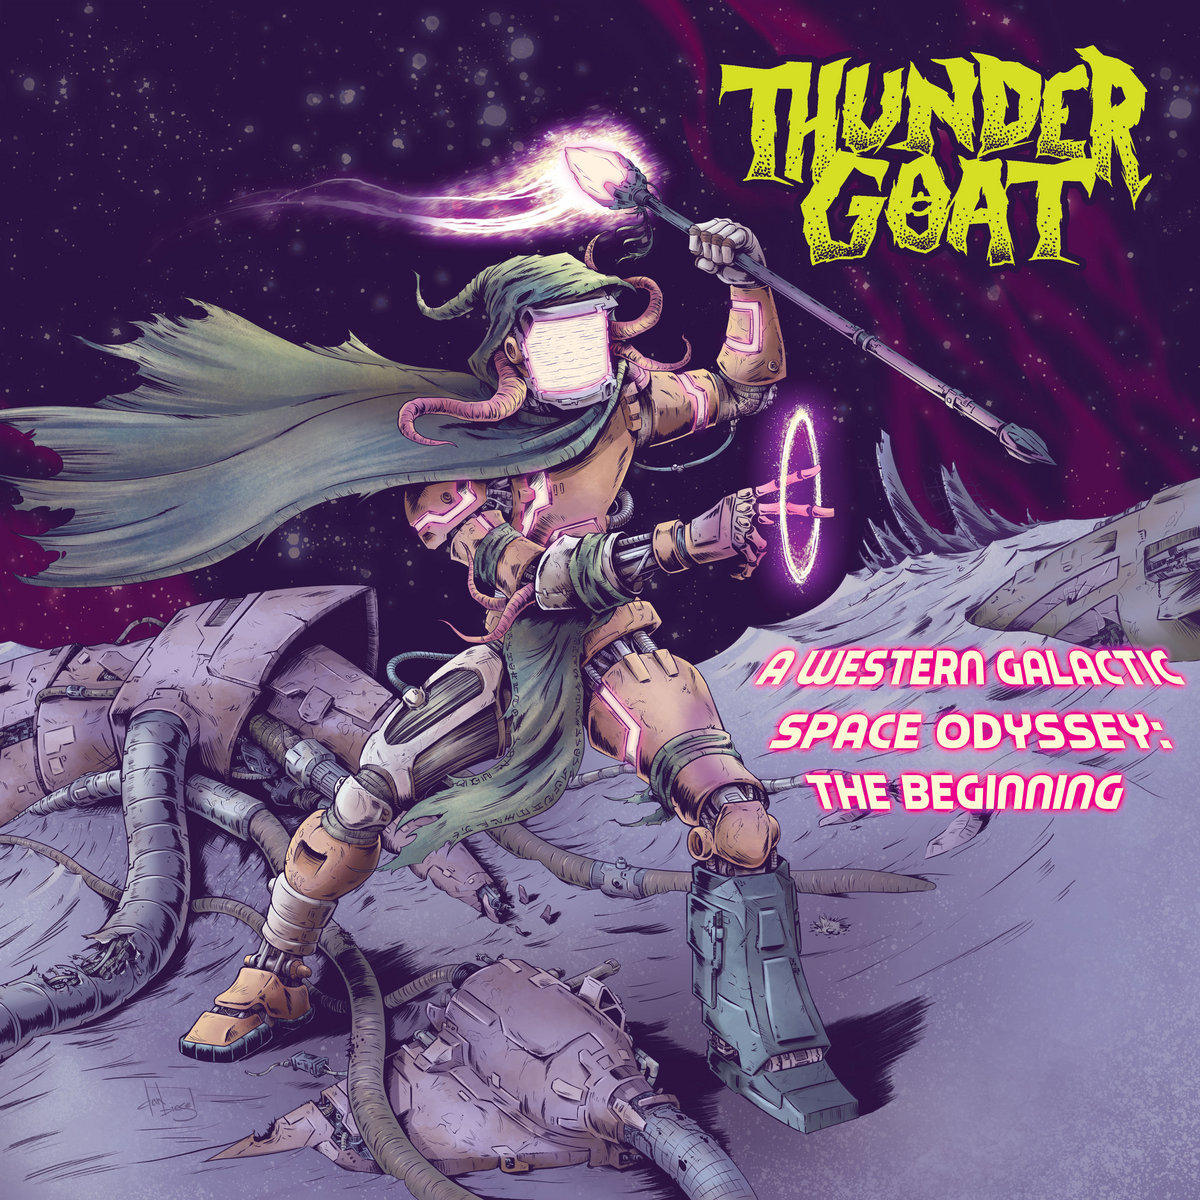 Thundergoat - "A Western Galactic Space Odyssey: The Beginning" - 2023